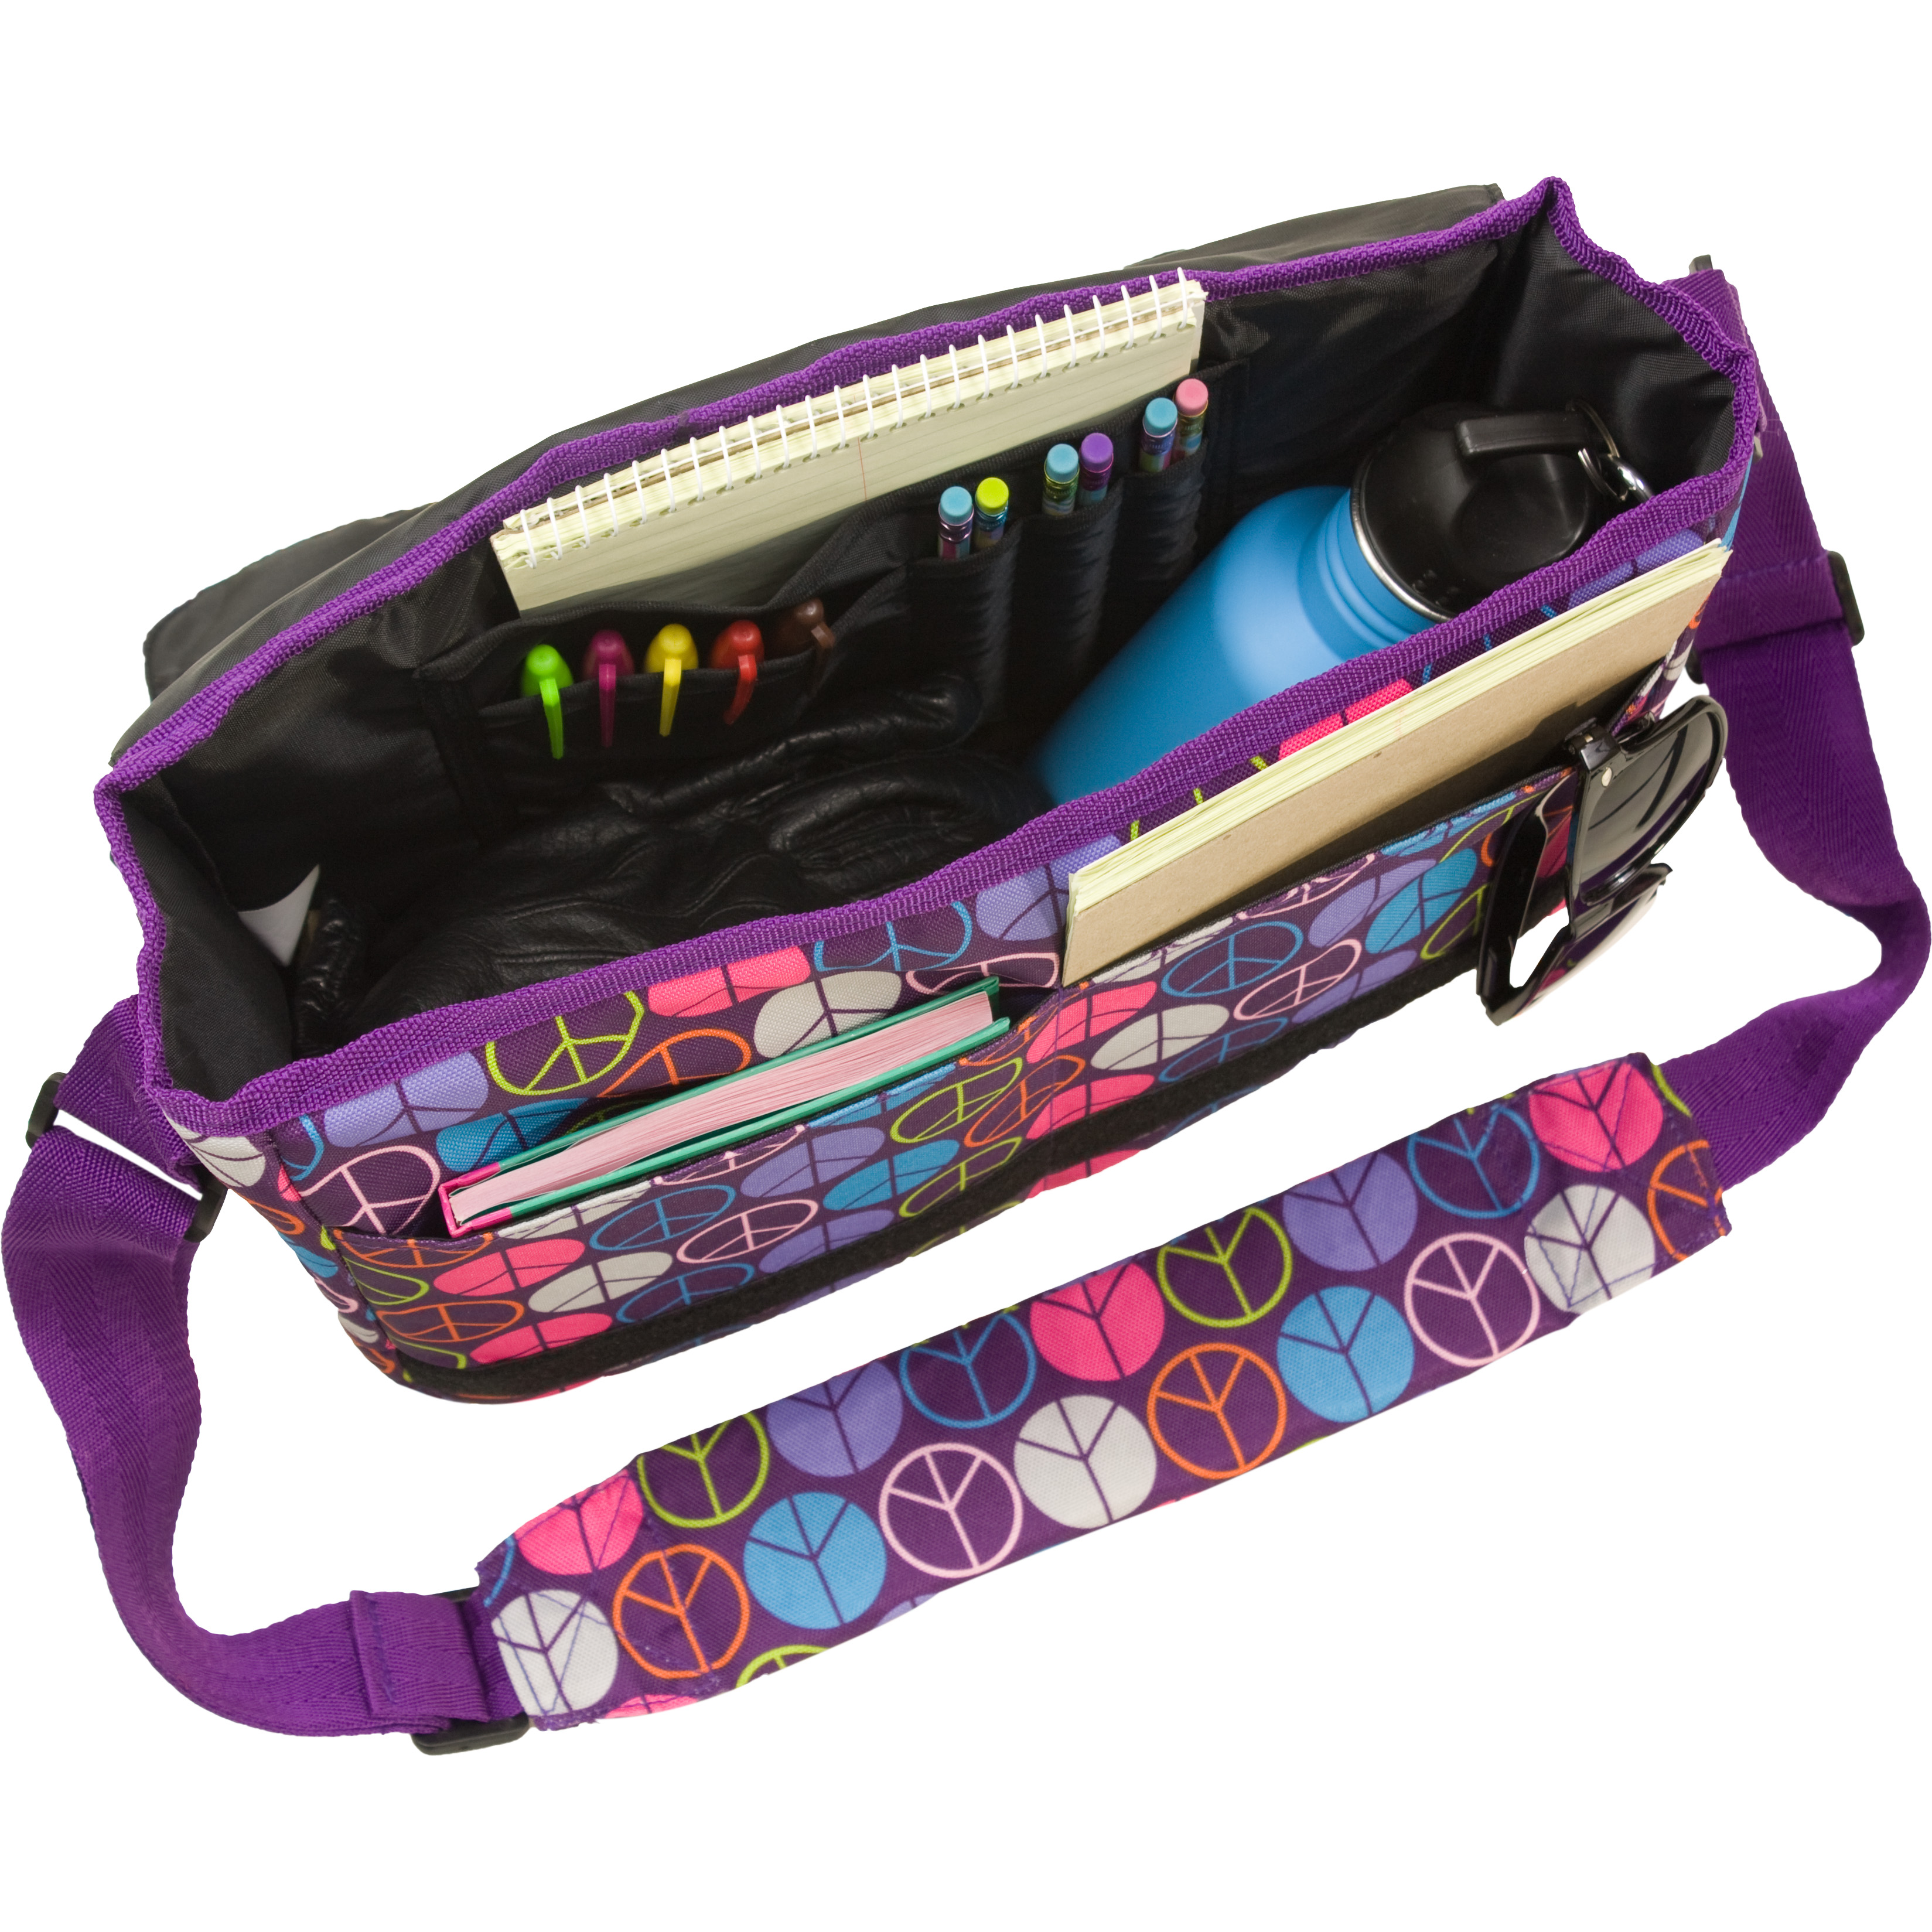 Wildkin Kids Messenger Bag for Girls, Perfect for School or Travel, 13 Inch (Peace Signs Purple) - image 3 of 7